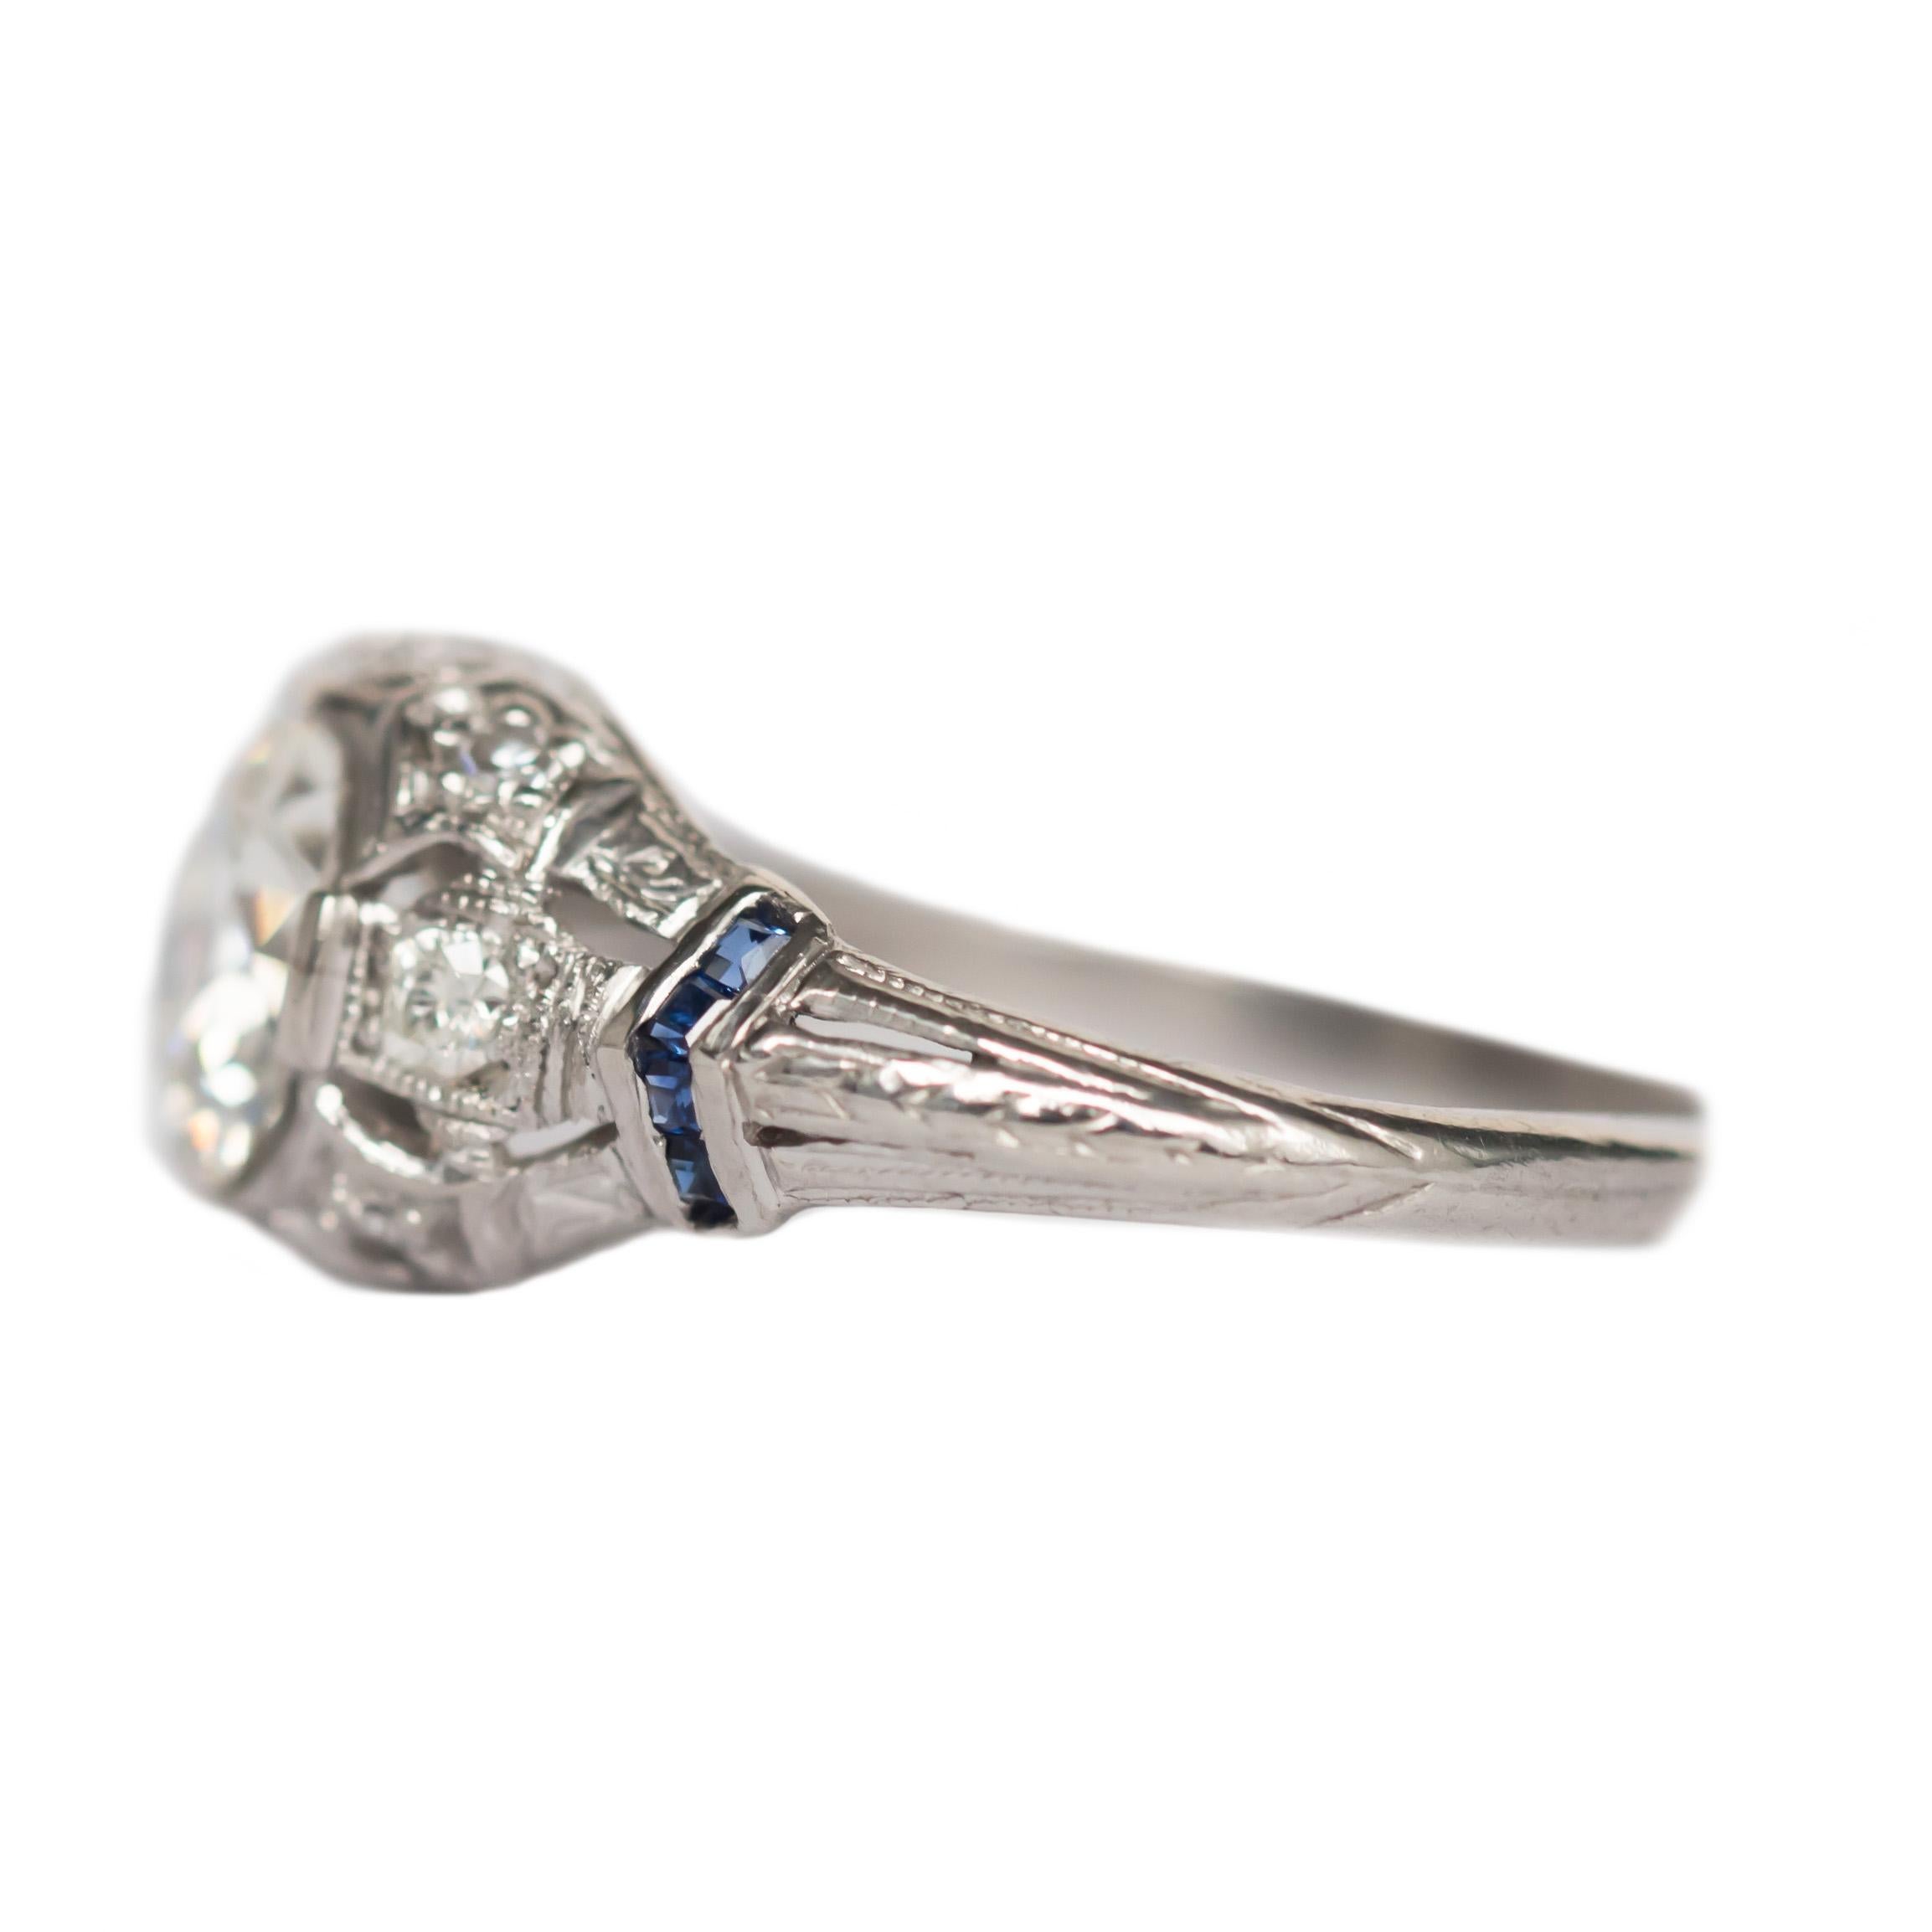 Item Details: 
Ring Size: 7.5
Metal Type: Platinum [Tested & Hallmarked]
Weight: 3.2 grams

Center Stone Details:
Weight: 1.32 carat
Cut: Old European Brilliant
Color: I
Clarity: SI2 

Side Diamond Stone Details:
Weight: .10 carat, total weight
Cut: